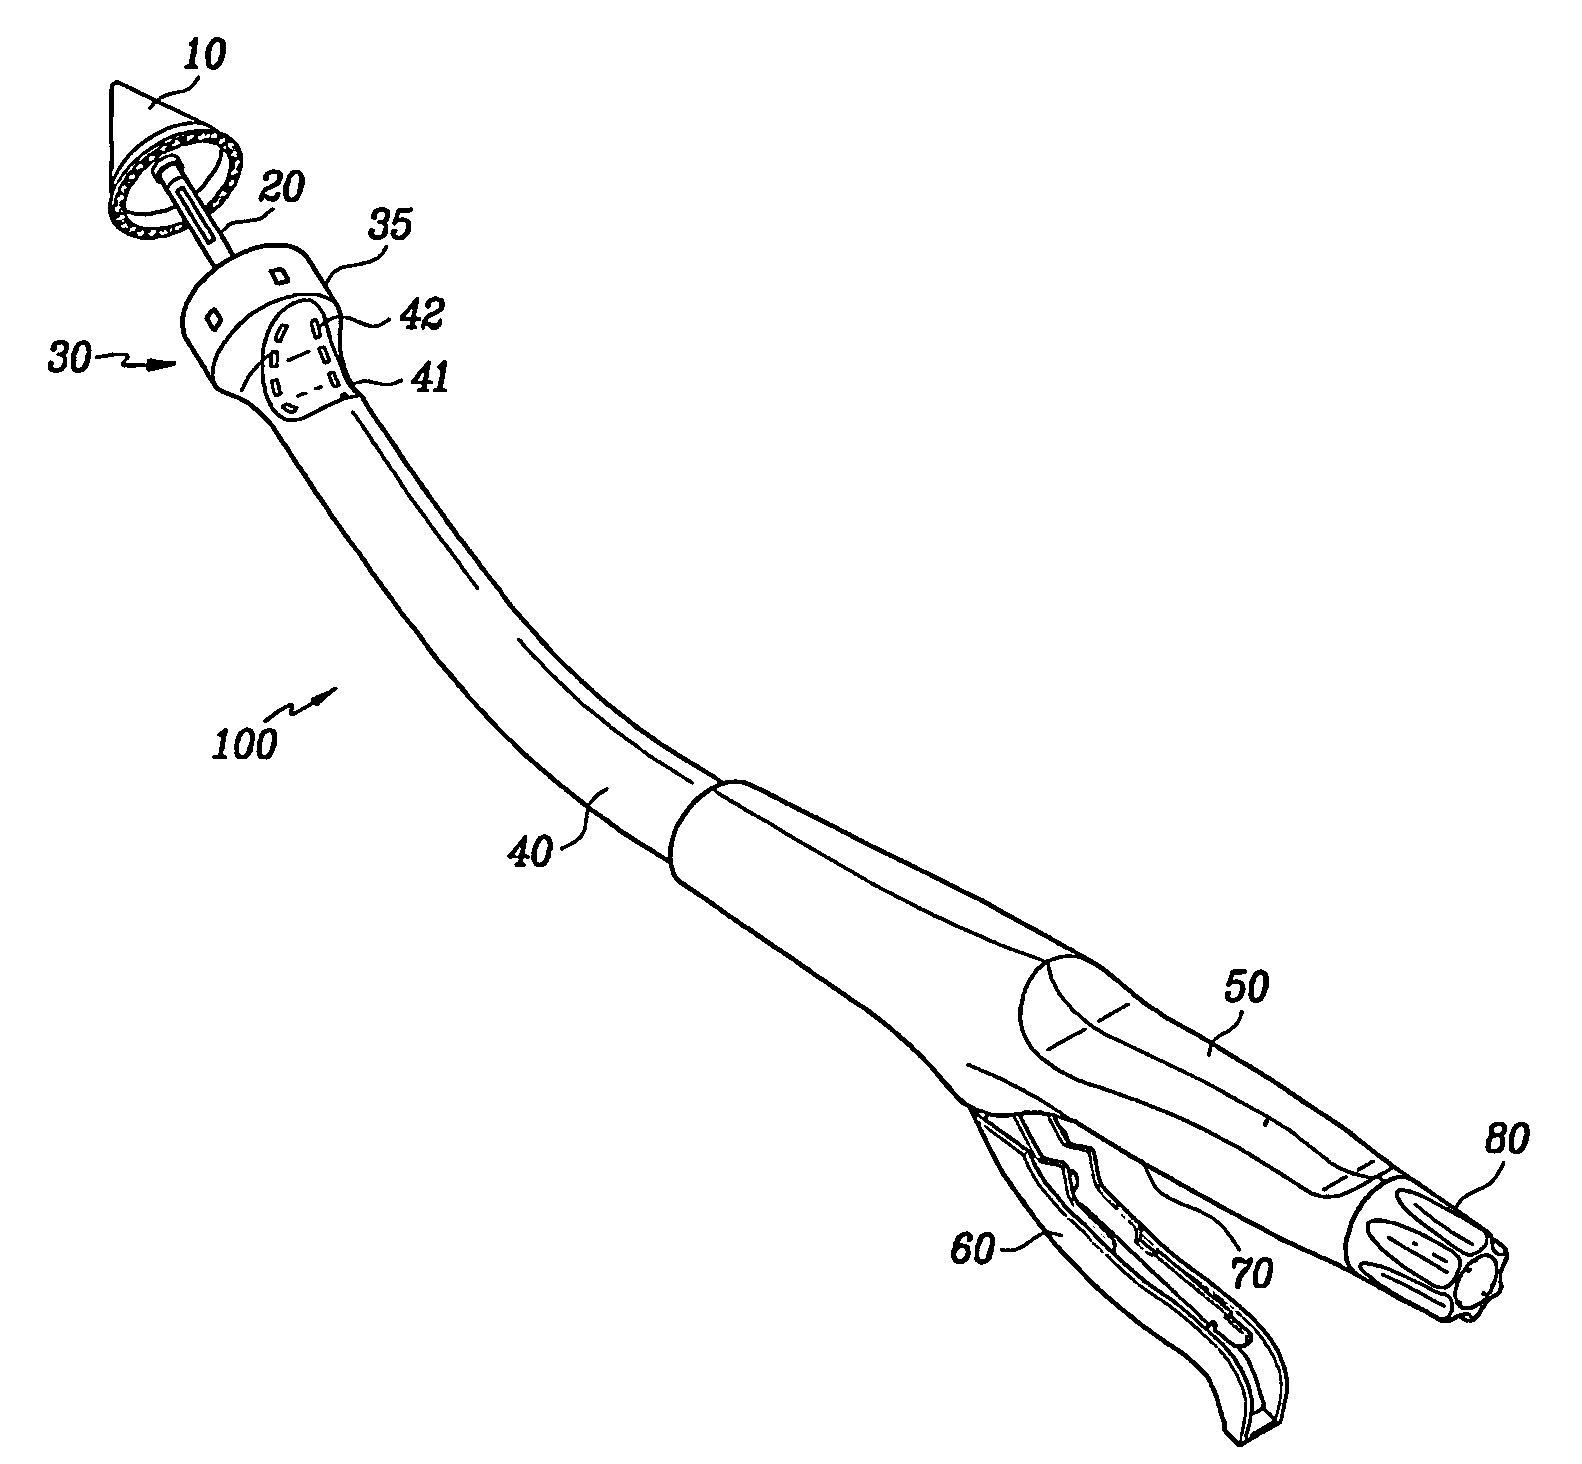 Circular surgical stapler with a detachable anvil